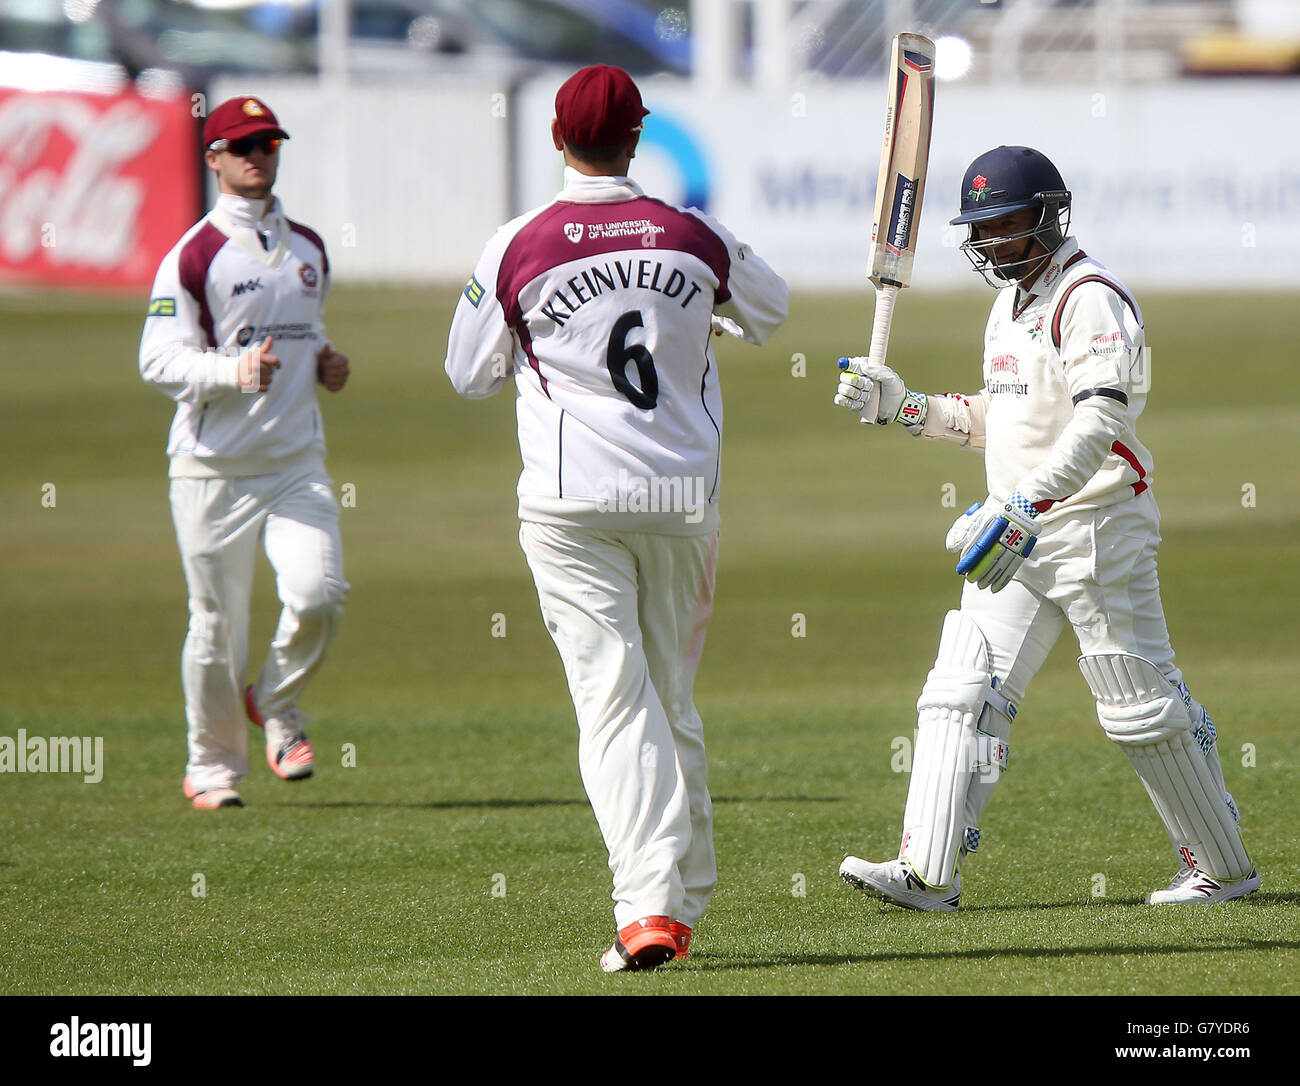 Lancashire's Ashwell Prince raise his bat to the crowd as he is dismissed on 153 during the LV County Championship, Division Two match at The County Ground, Northamptonshire. Stock Photo